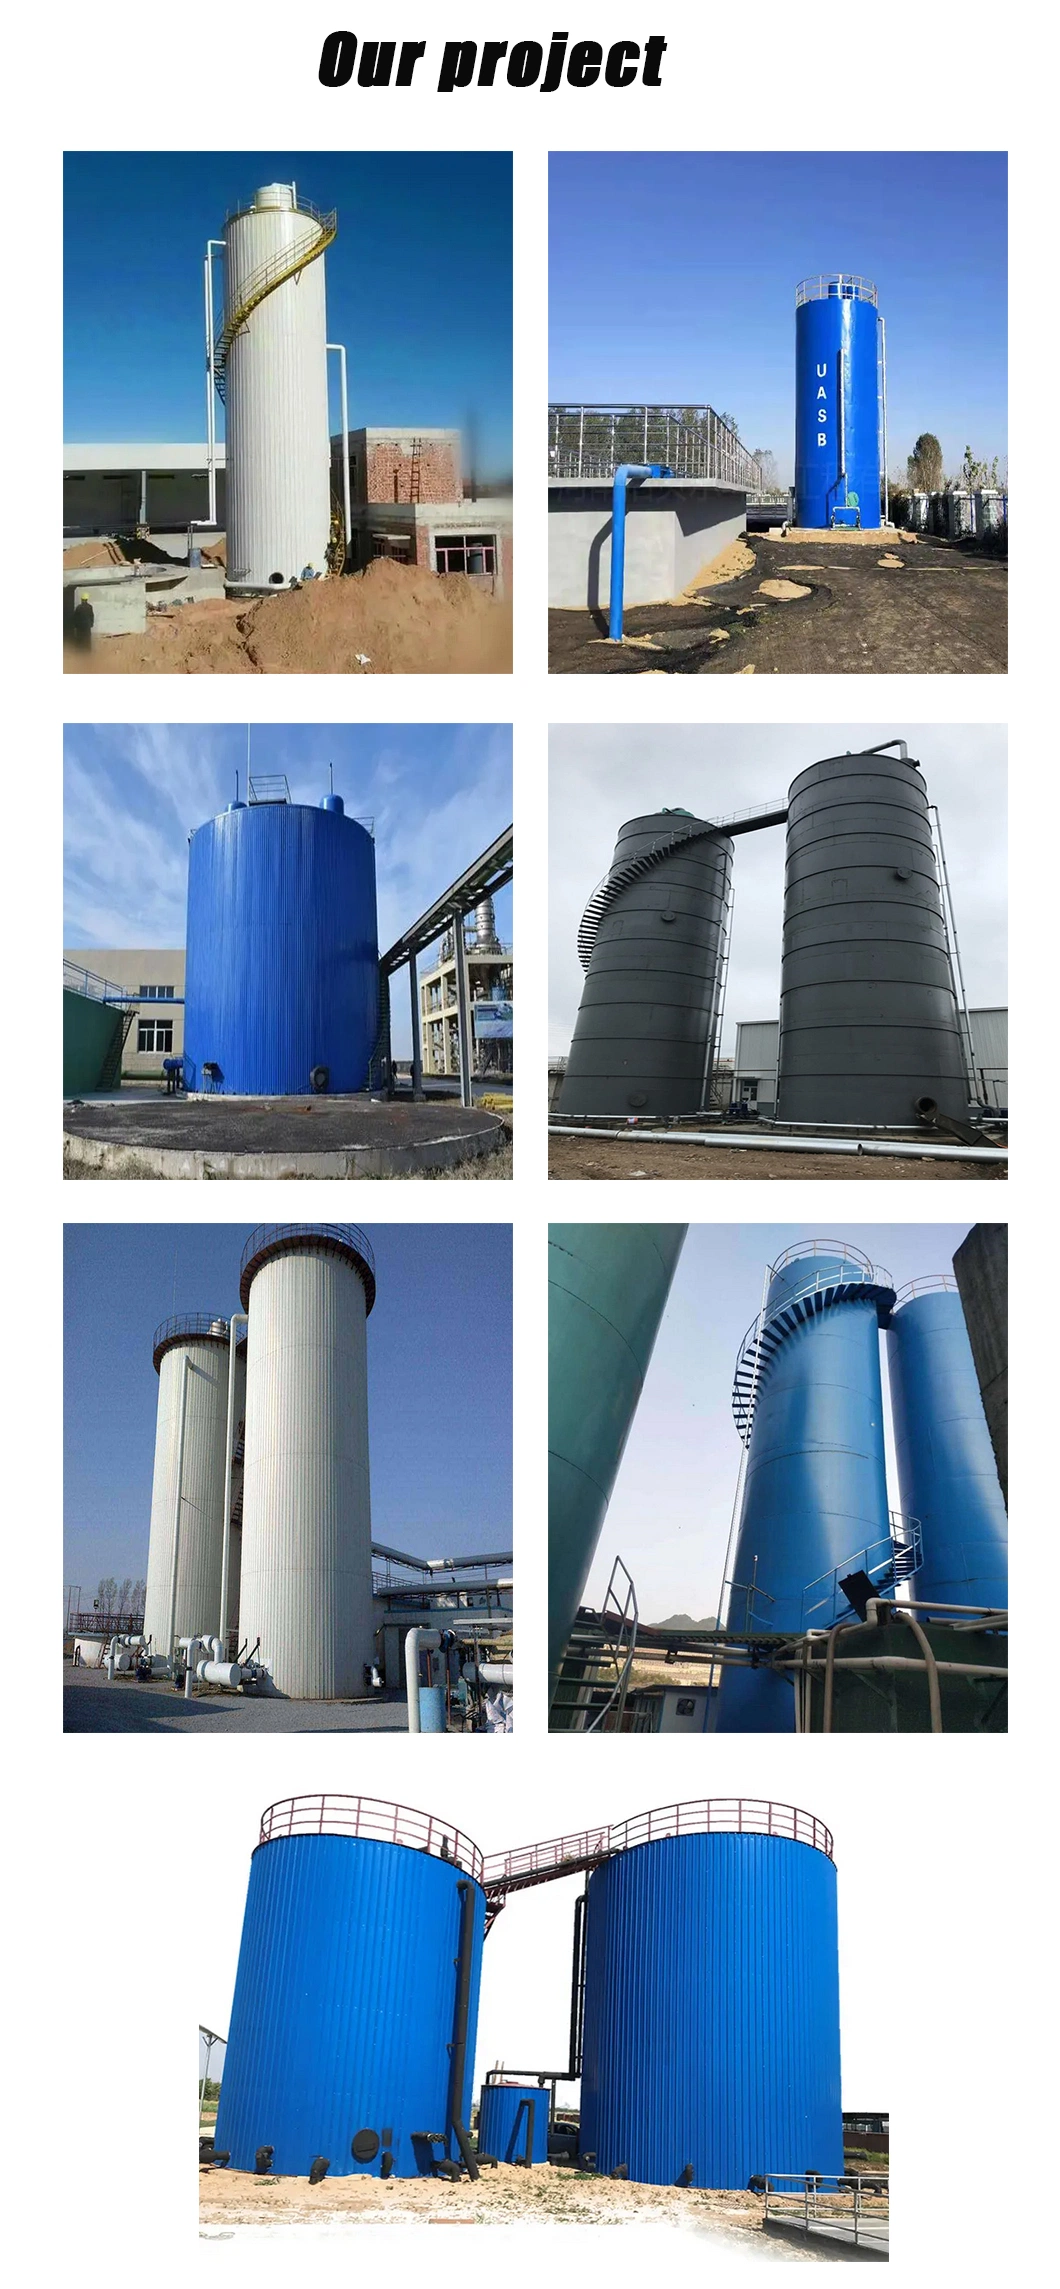 IC Anaerobic Reactor Used for Water Treatment Equipment in Sewage Treatment Stations